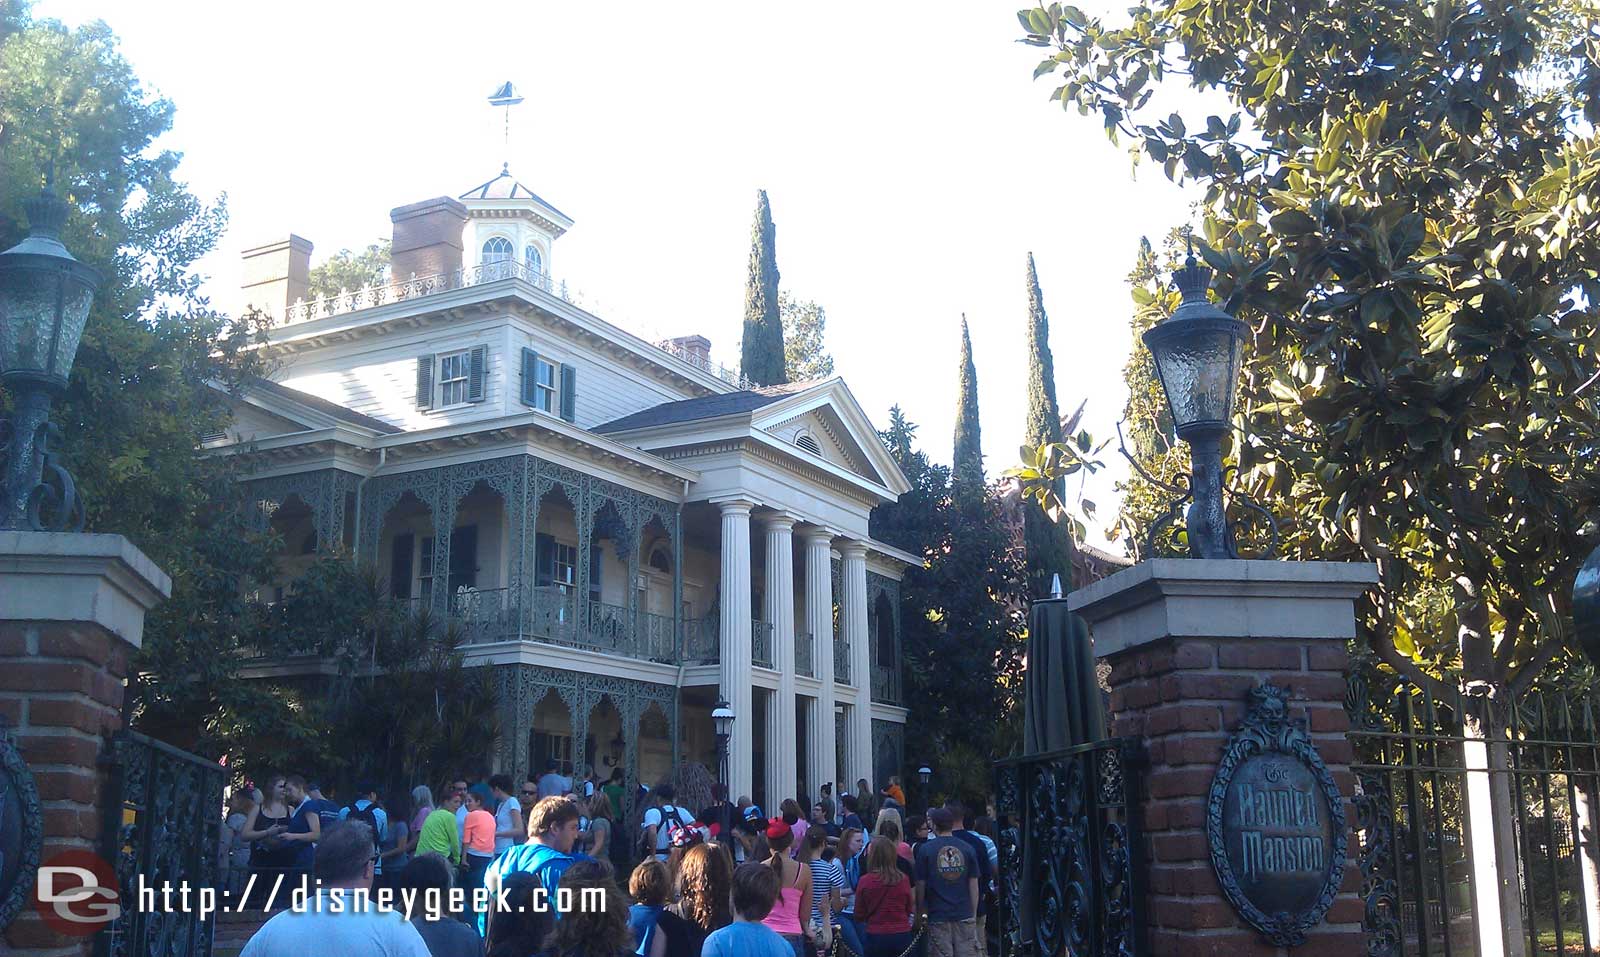 The Haunted Mansion has reopened.